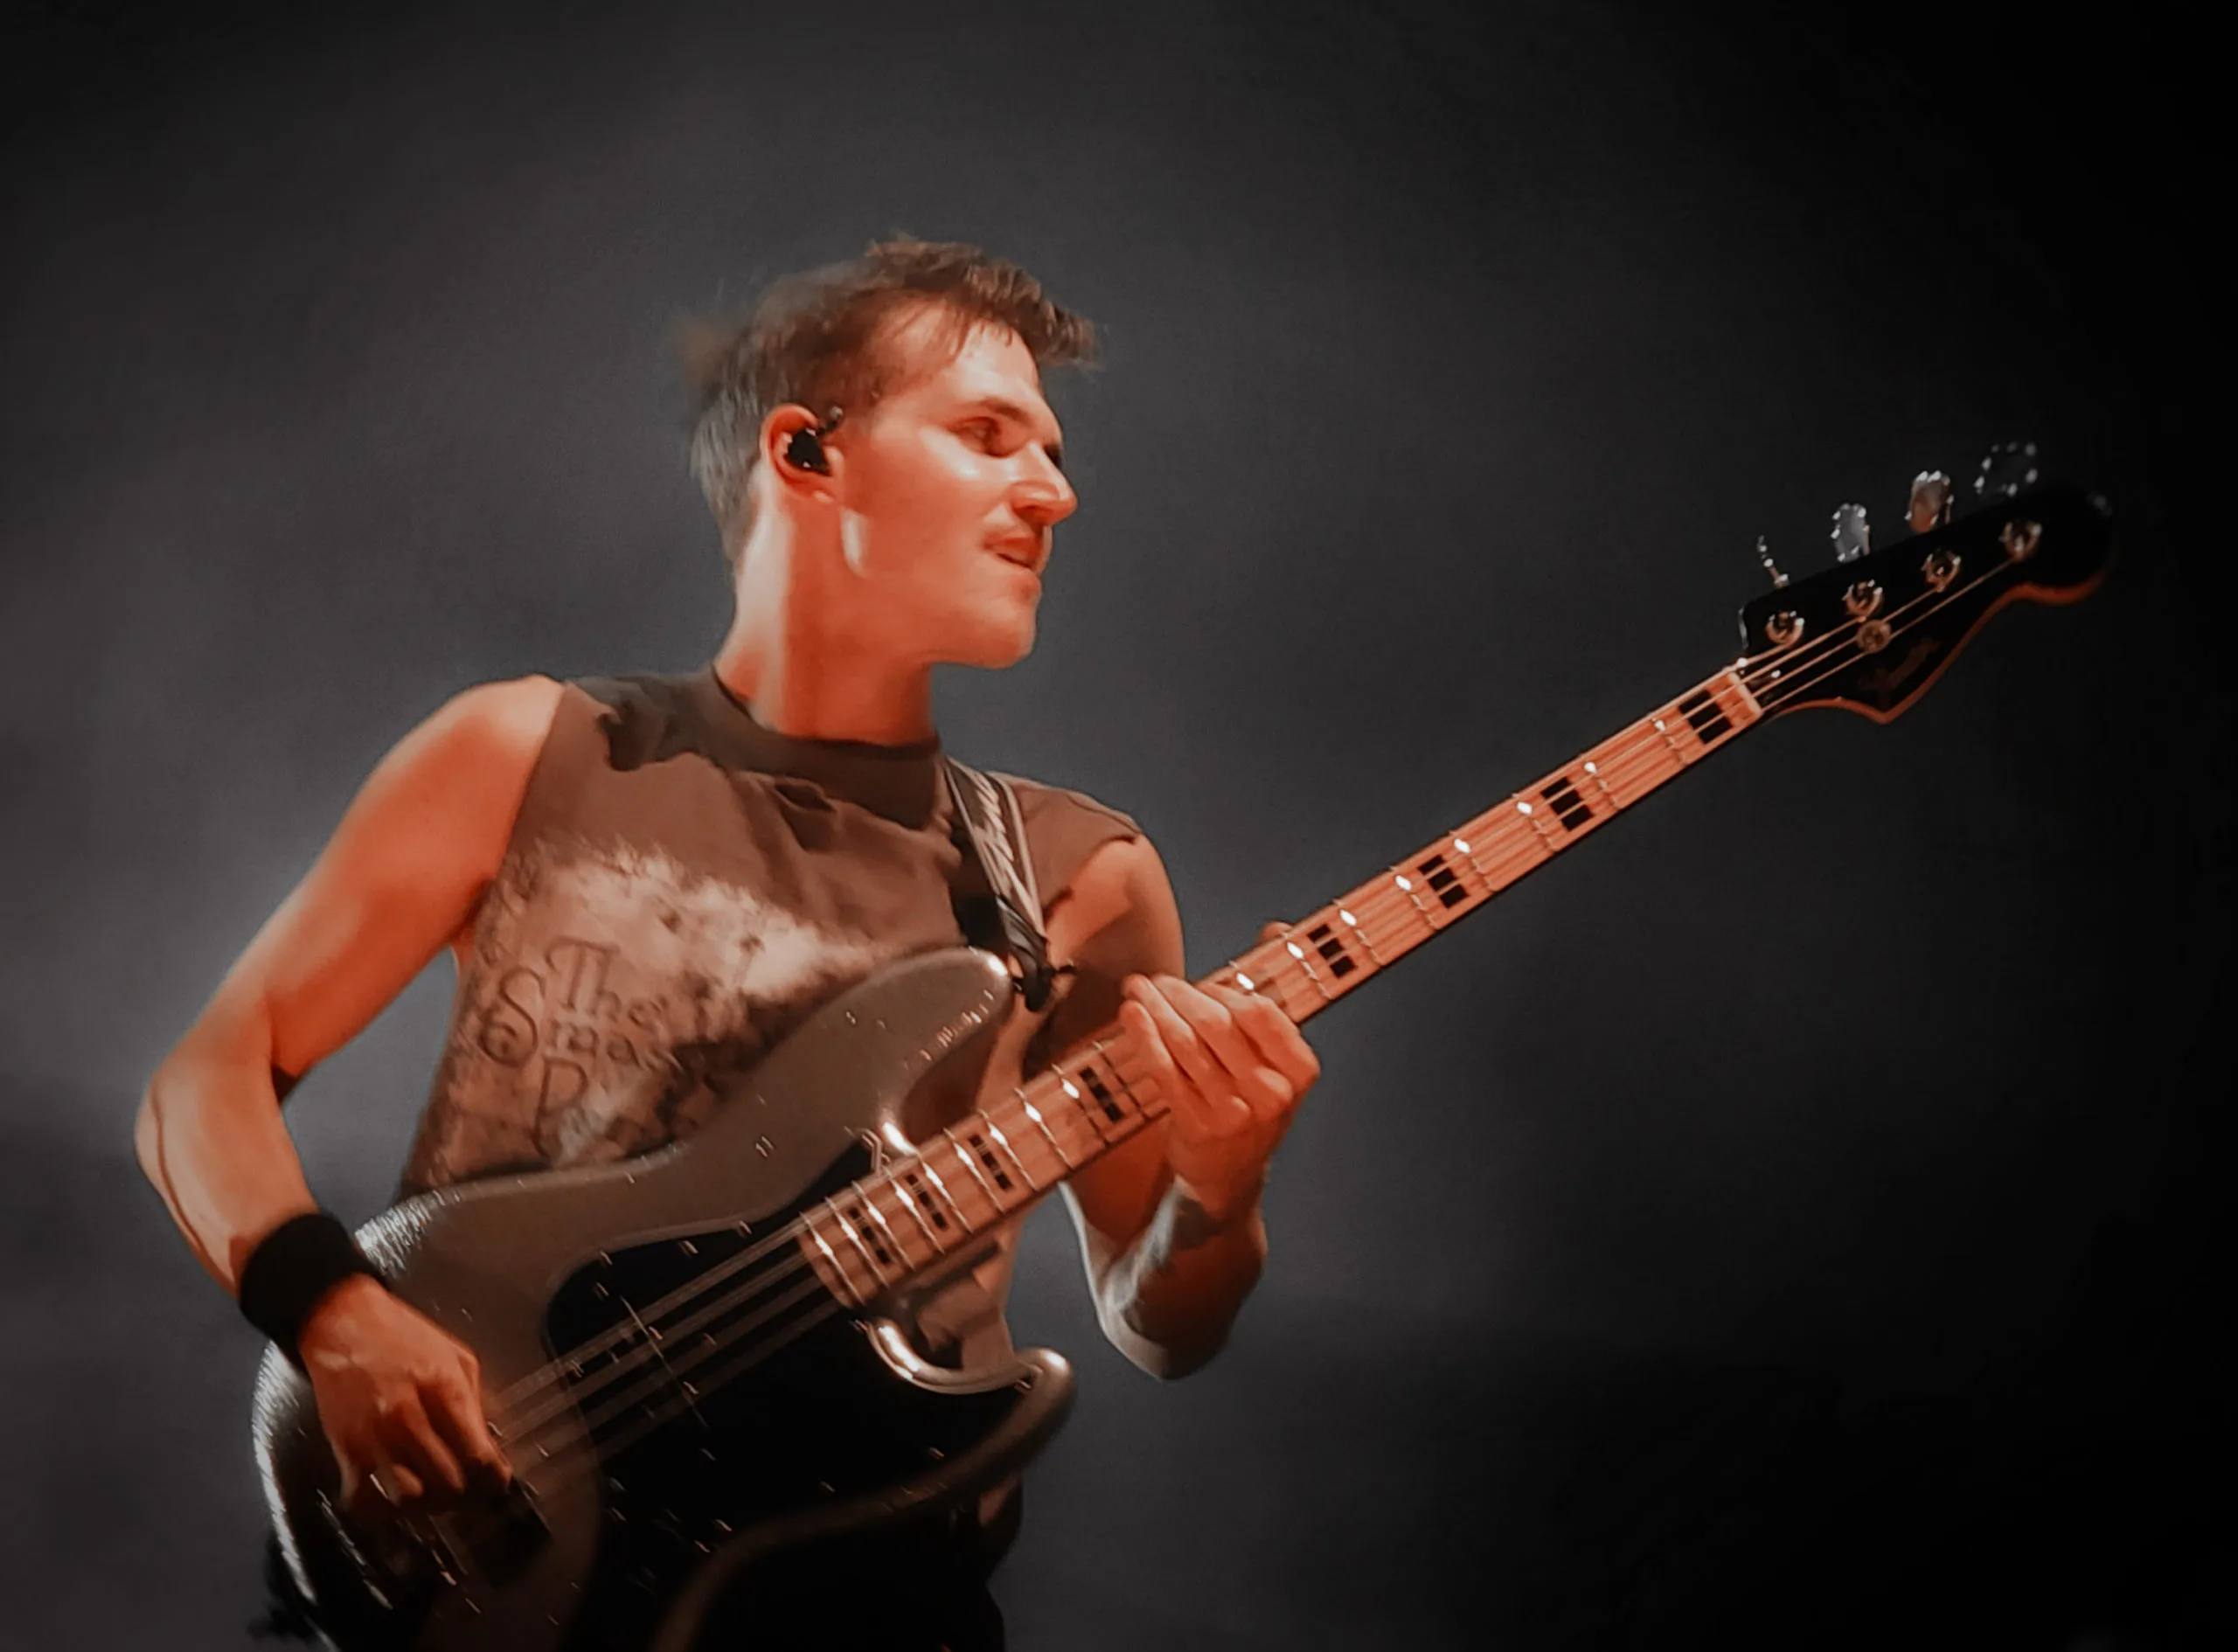 Mikey Way at Riot Fest 